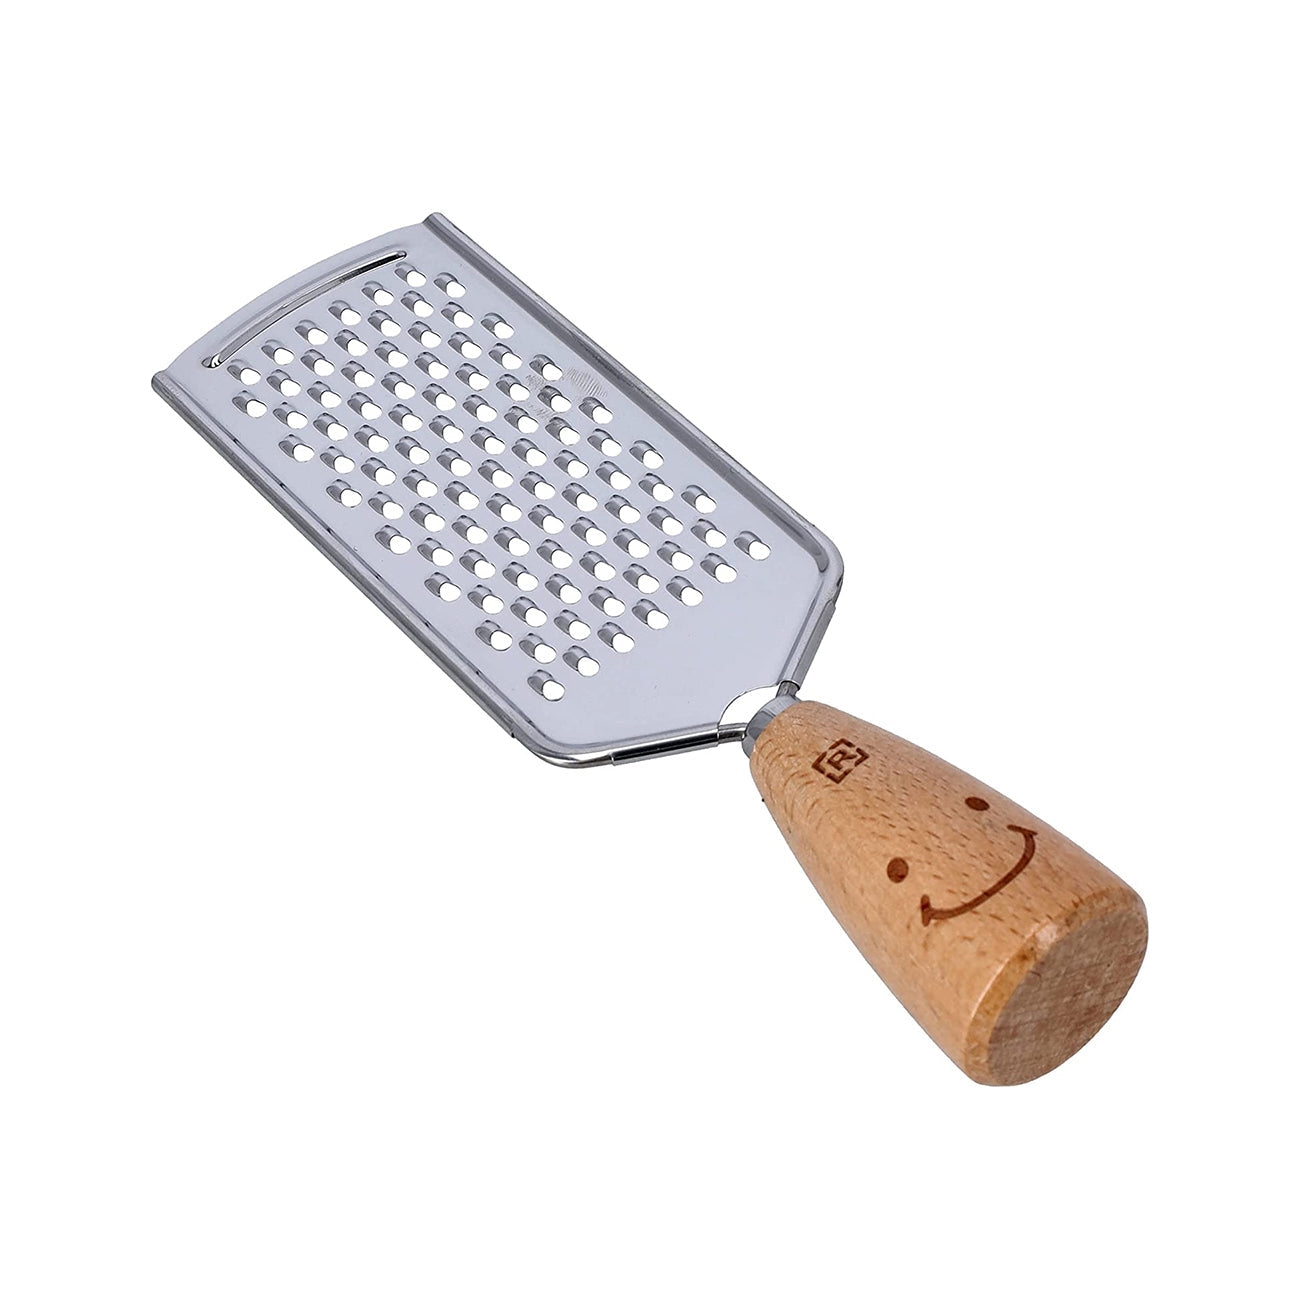 RoyalFord Cheese Grater, Stainless Steel with Wooden Handle, RF10660 Handheld Shredder for Fruit, Vegetables, Nuts, Cheese & Zest Comfortable & Non Slip, Multicolor